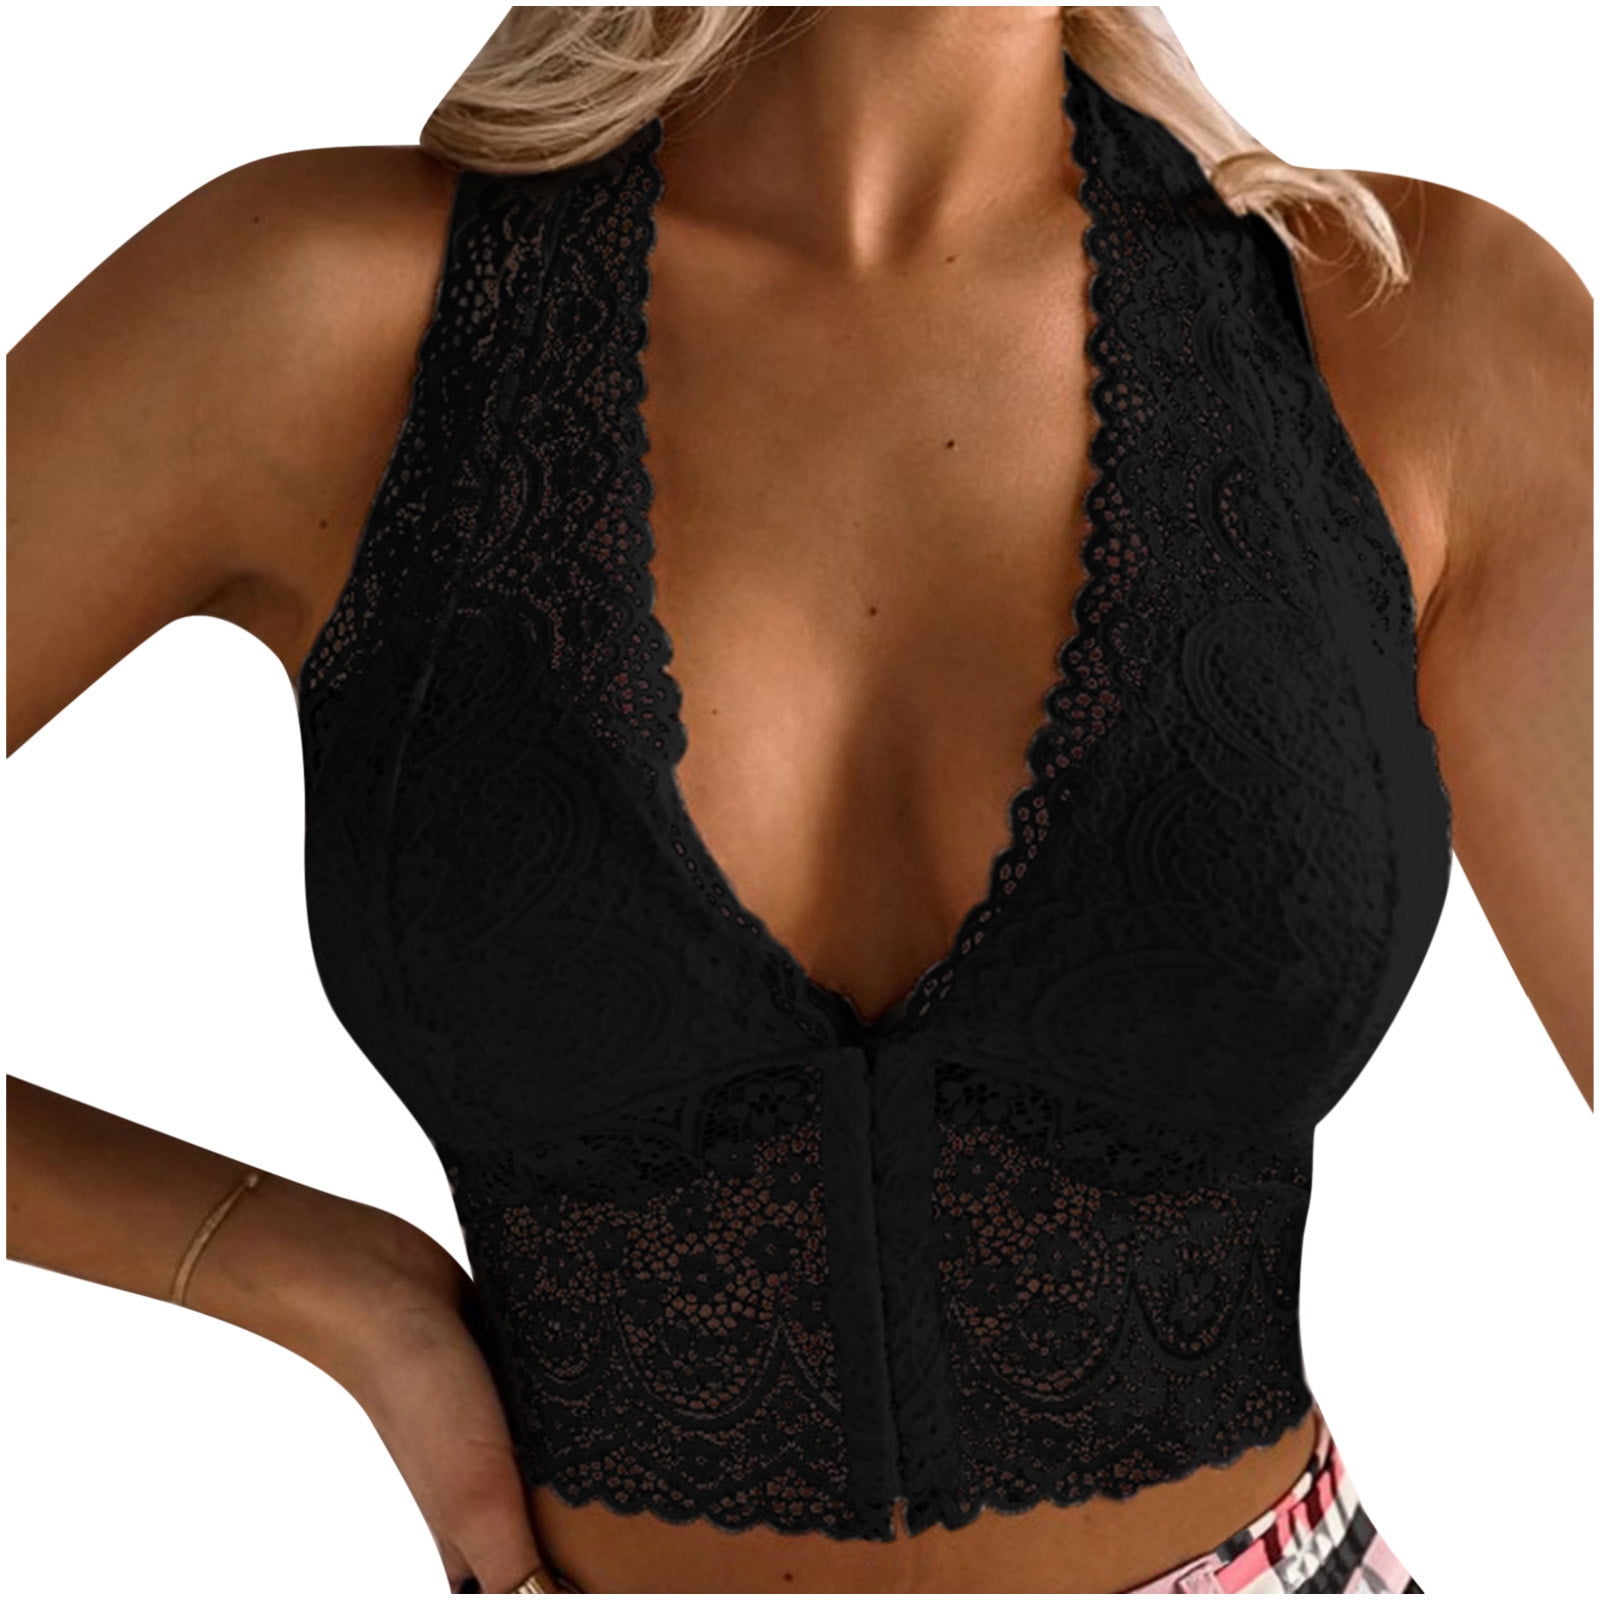 YYDGH Women's High Neck Deep V Lace Bralette Padded Lace Wireless Halter Bra  Hollow Out Floral Crop Top Vest Bra Red XL 